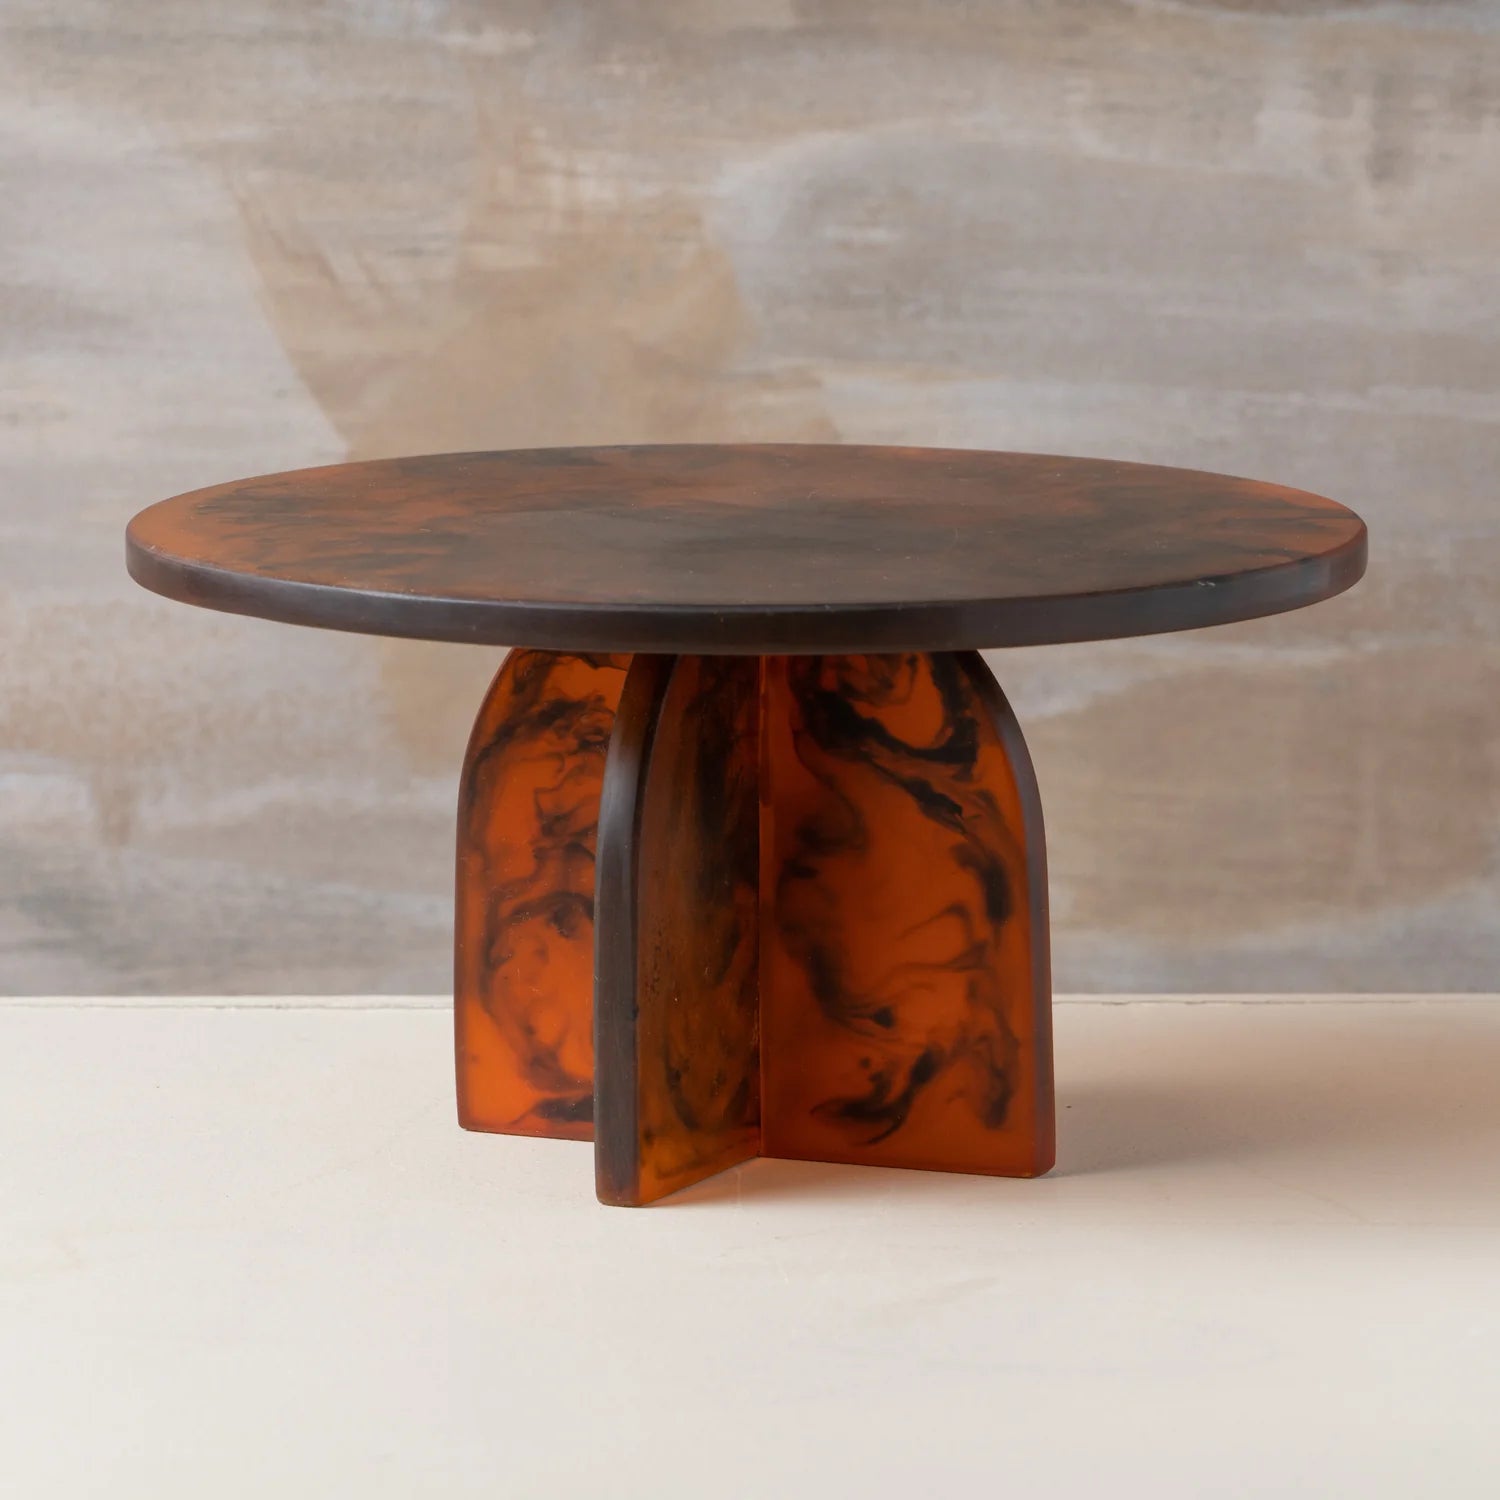 Flow Resin Cake Stand